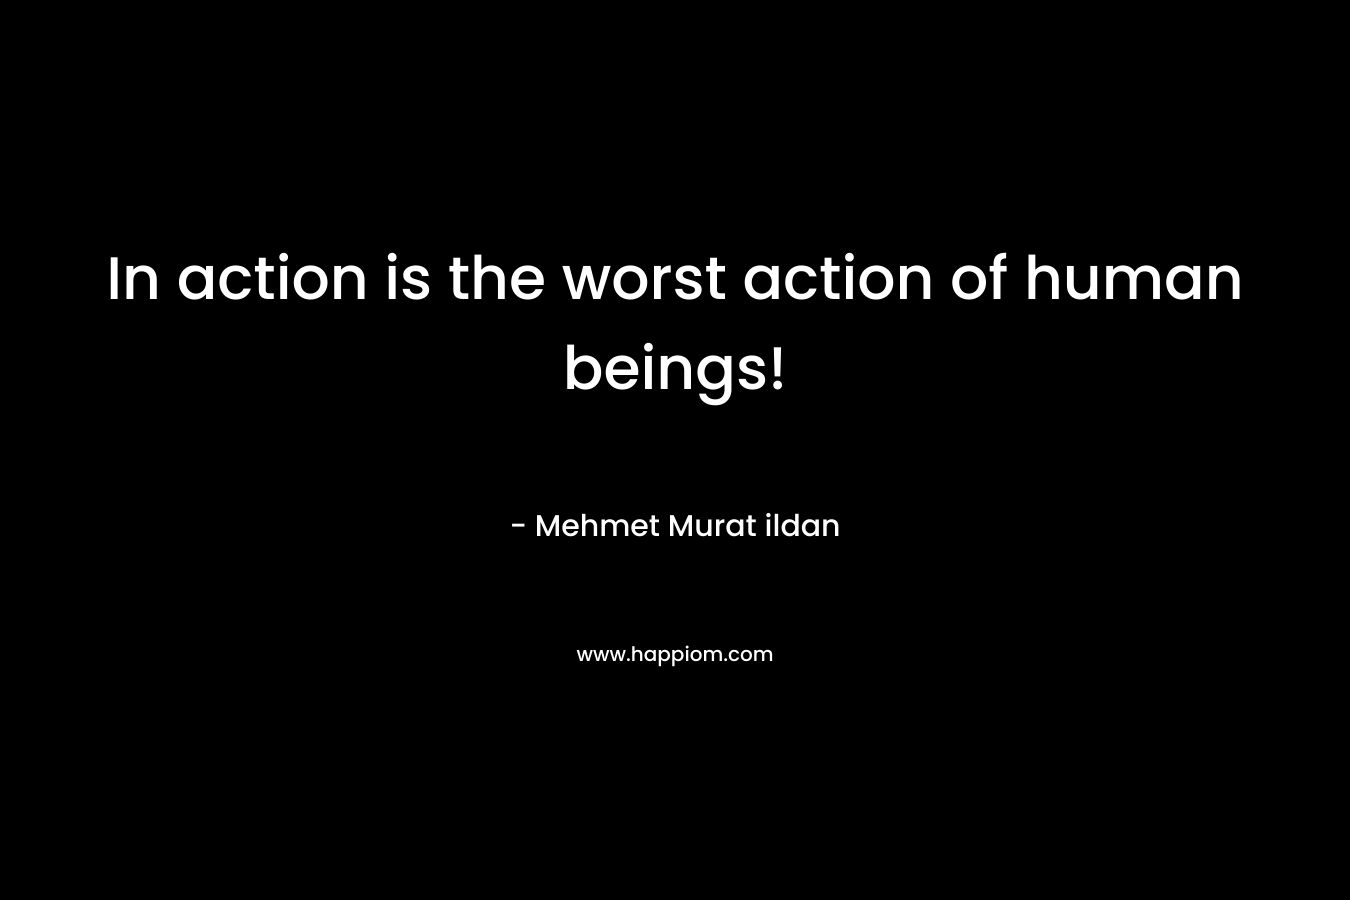 In action is the worst action of human beings!